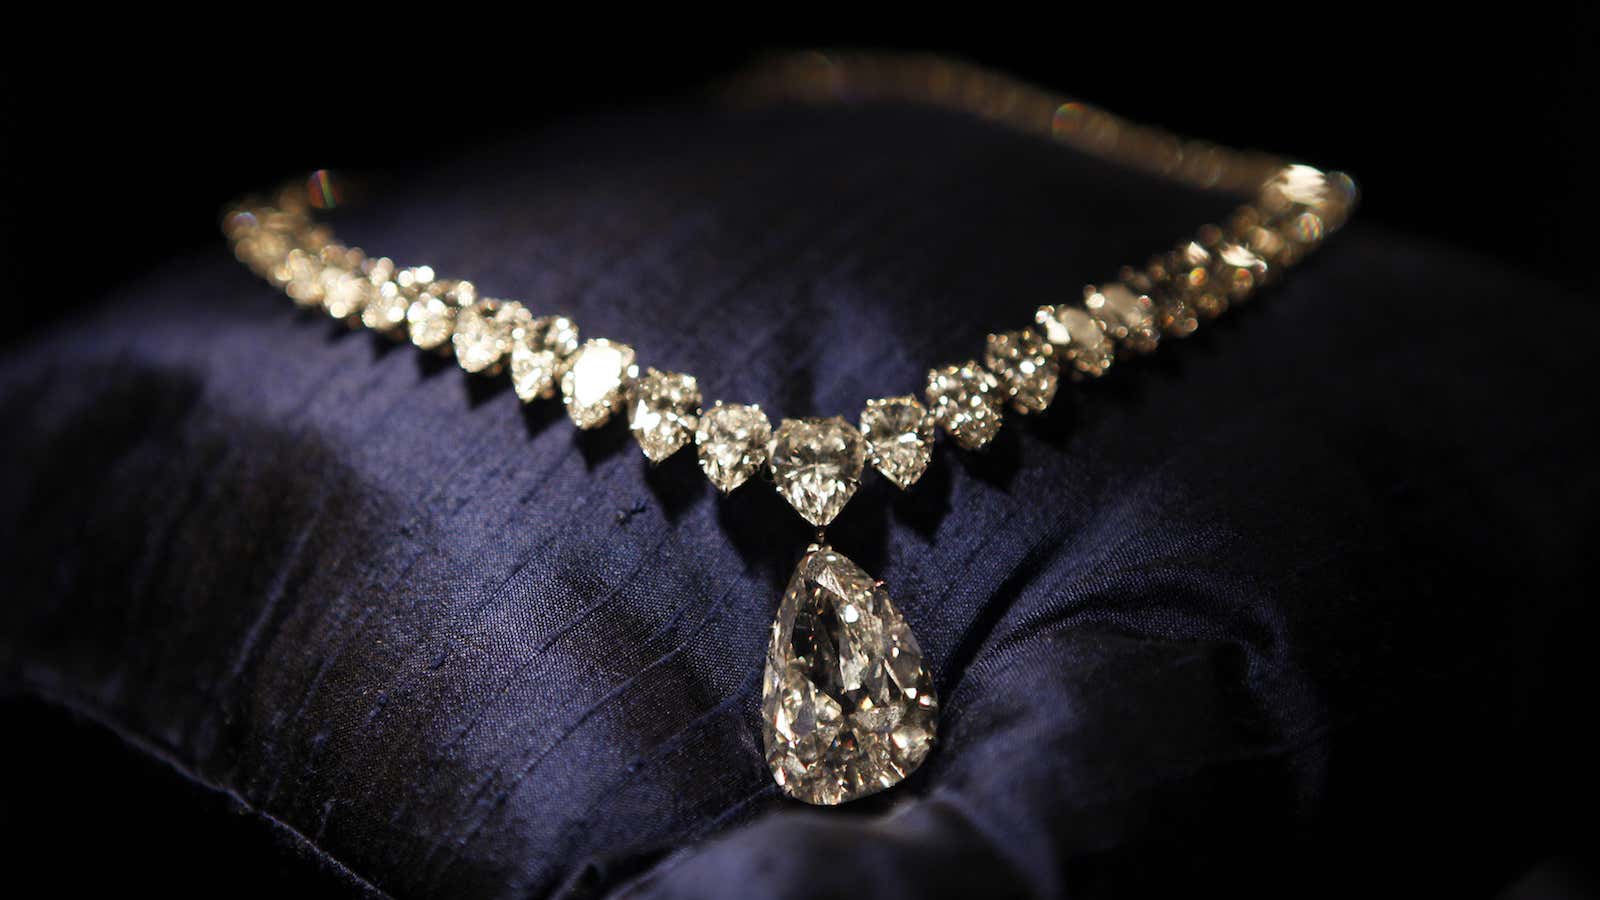 Indians have come to control almost three-quarters of Antwerp’s diamond industry.